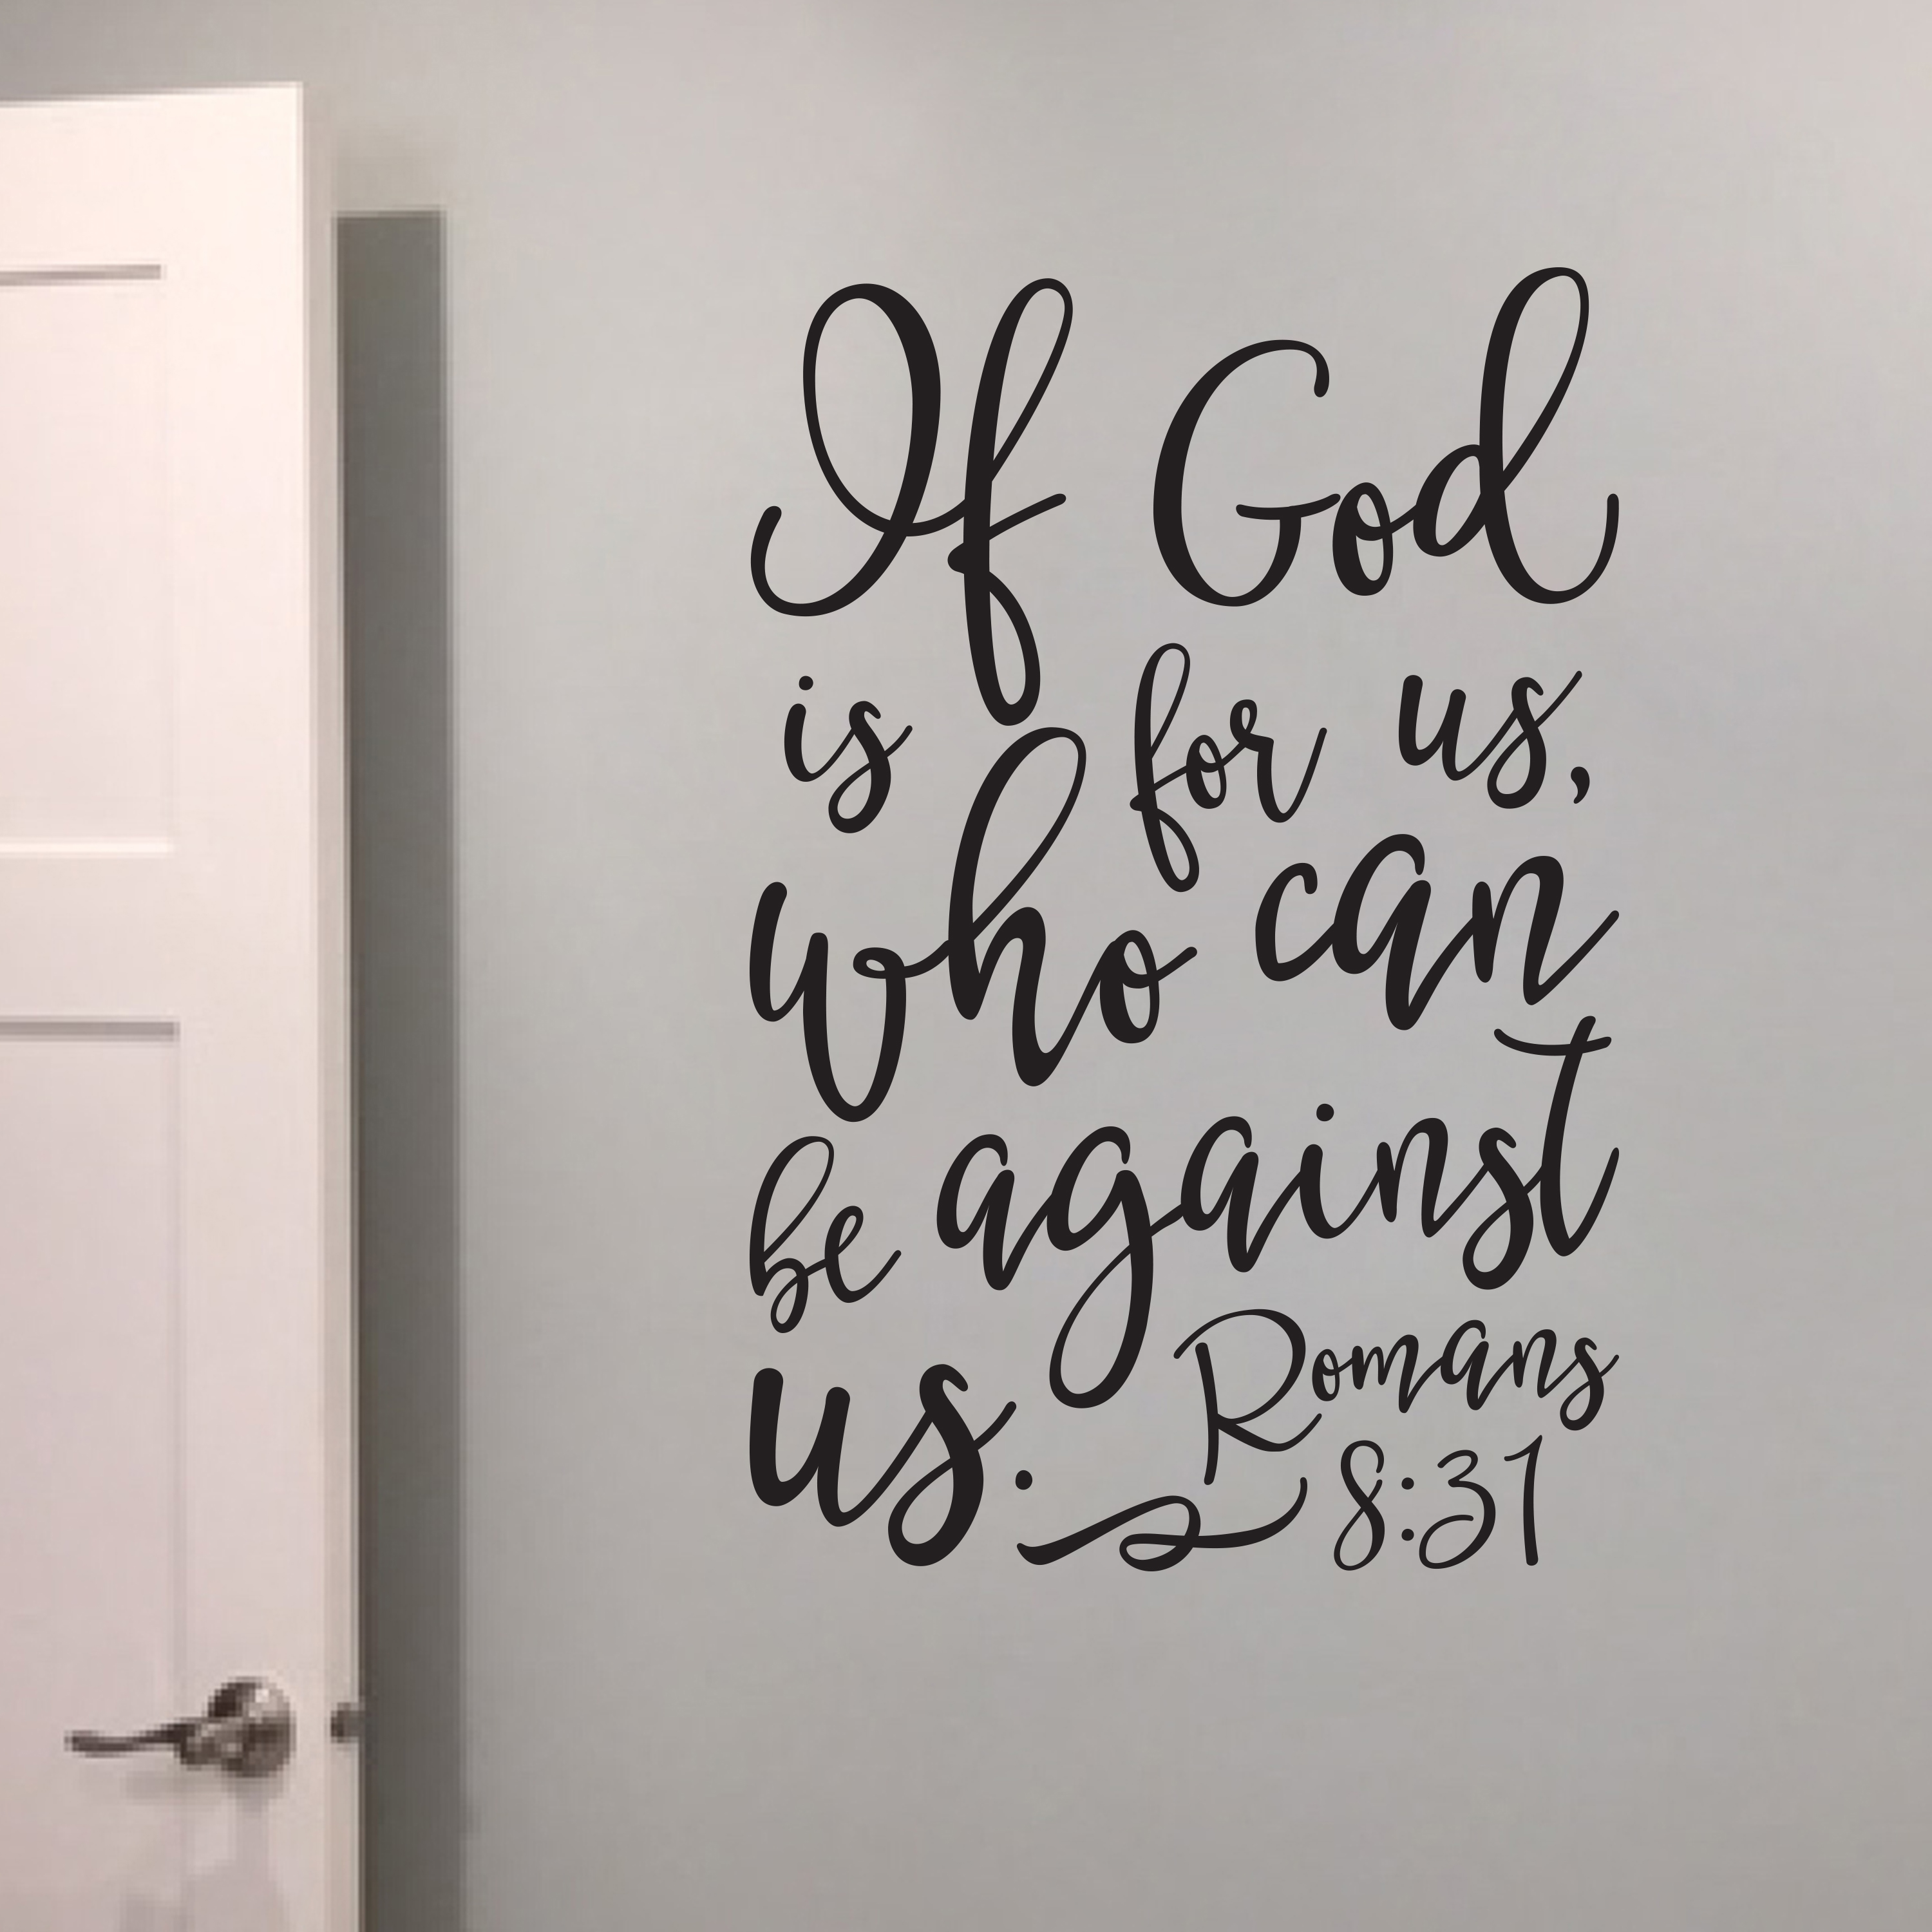 Romans 8v31 Vinyl Wall Decal If God Is For Us Who Can Be Against Us